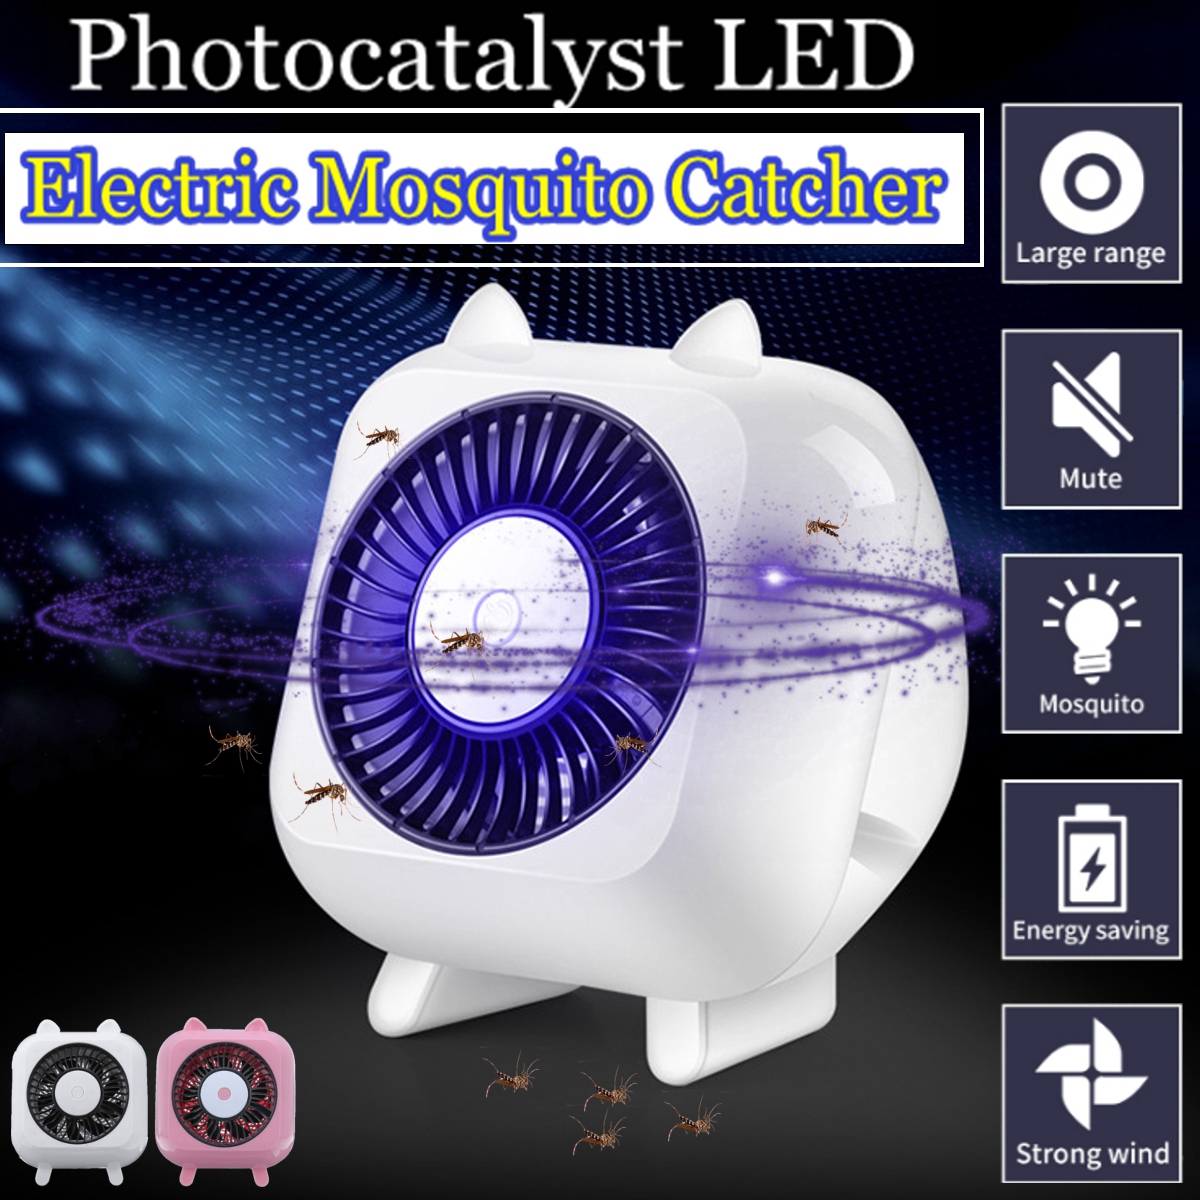 Electric-Photocatalyst-LED-Mosquito-Trapping-Catcher-Lamp-Insect-killer-Trap-Light-1533647-1